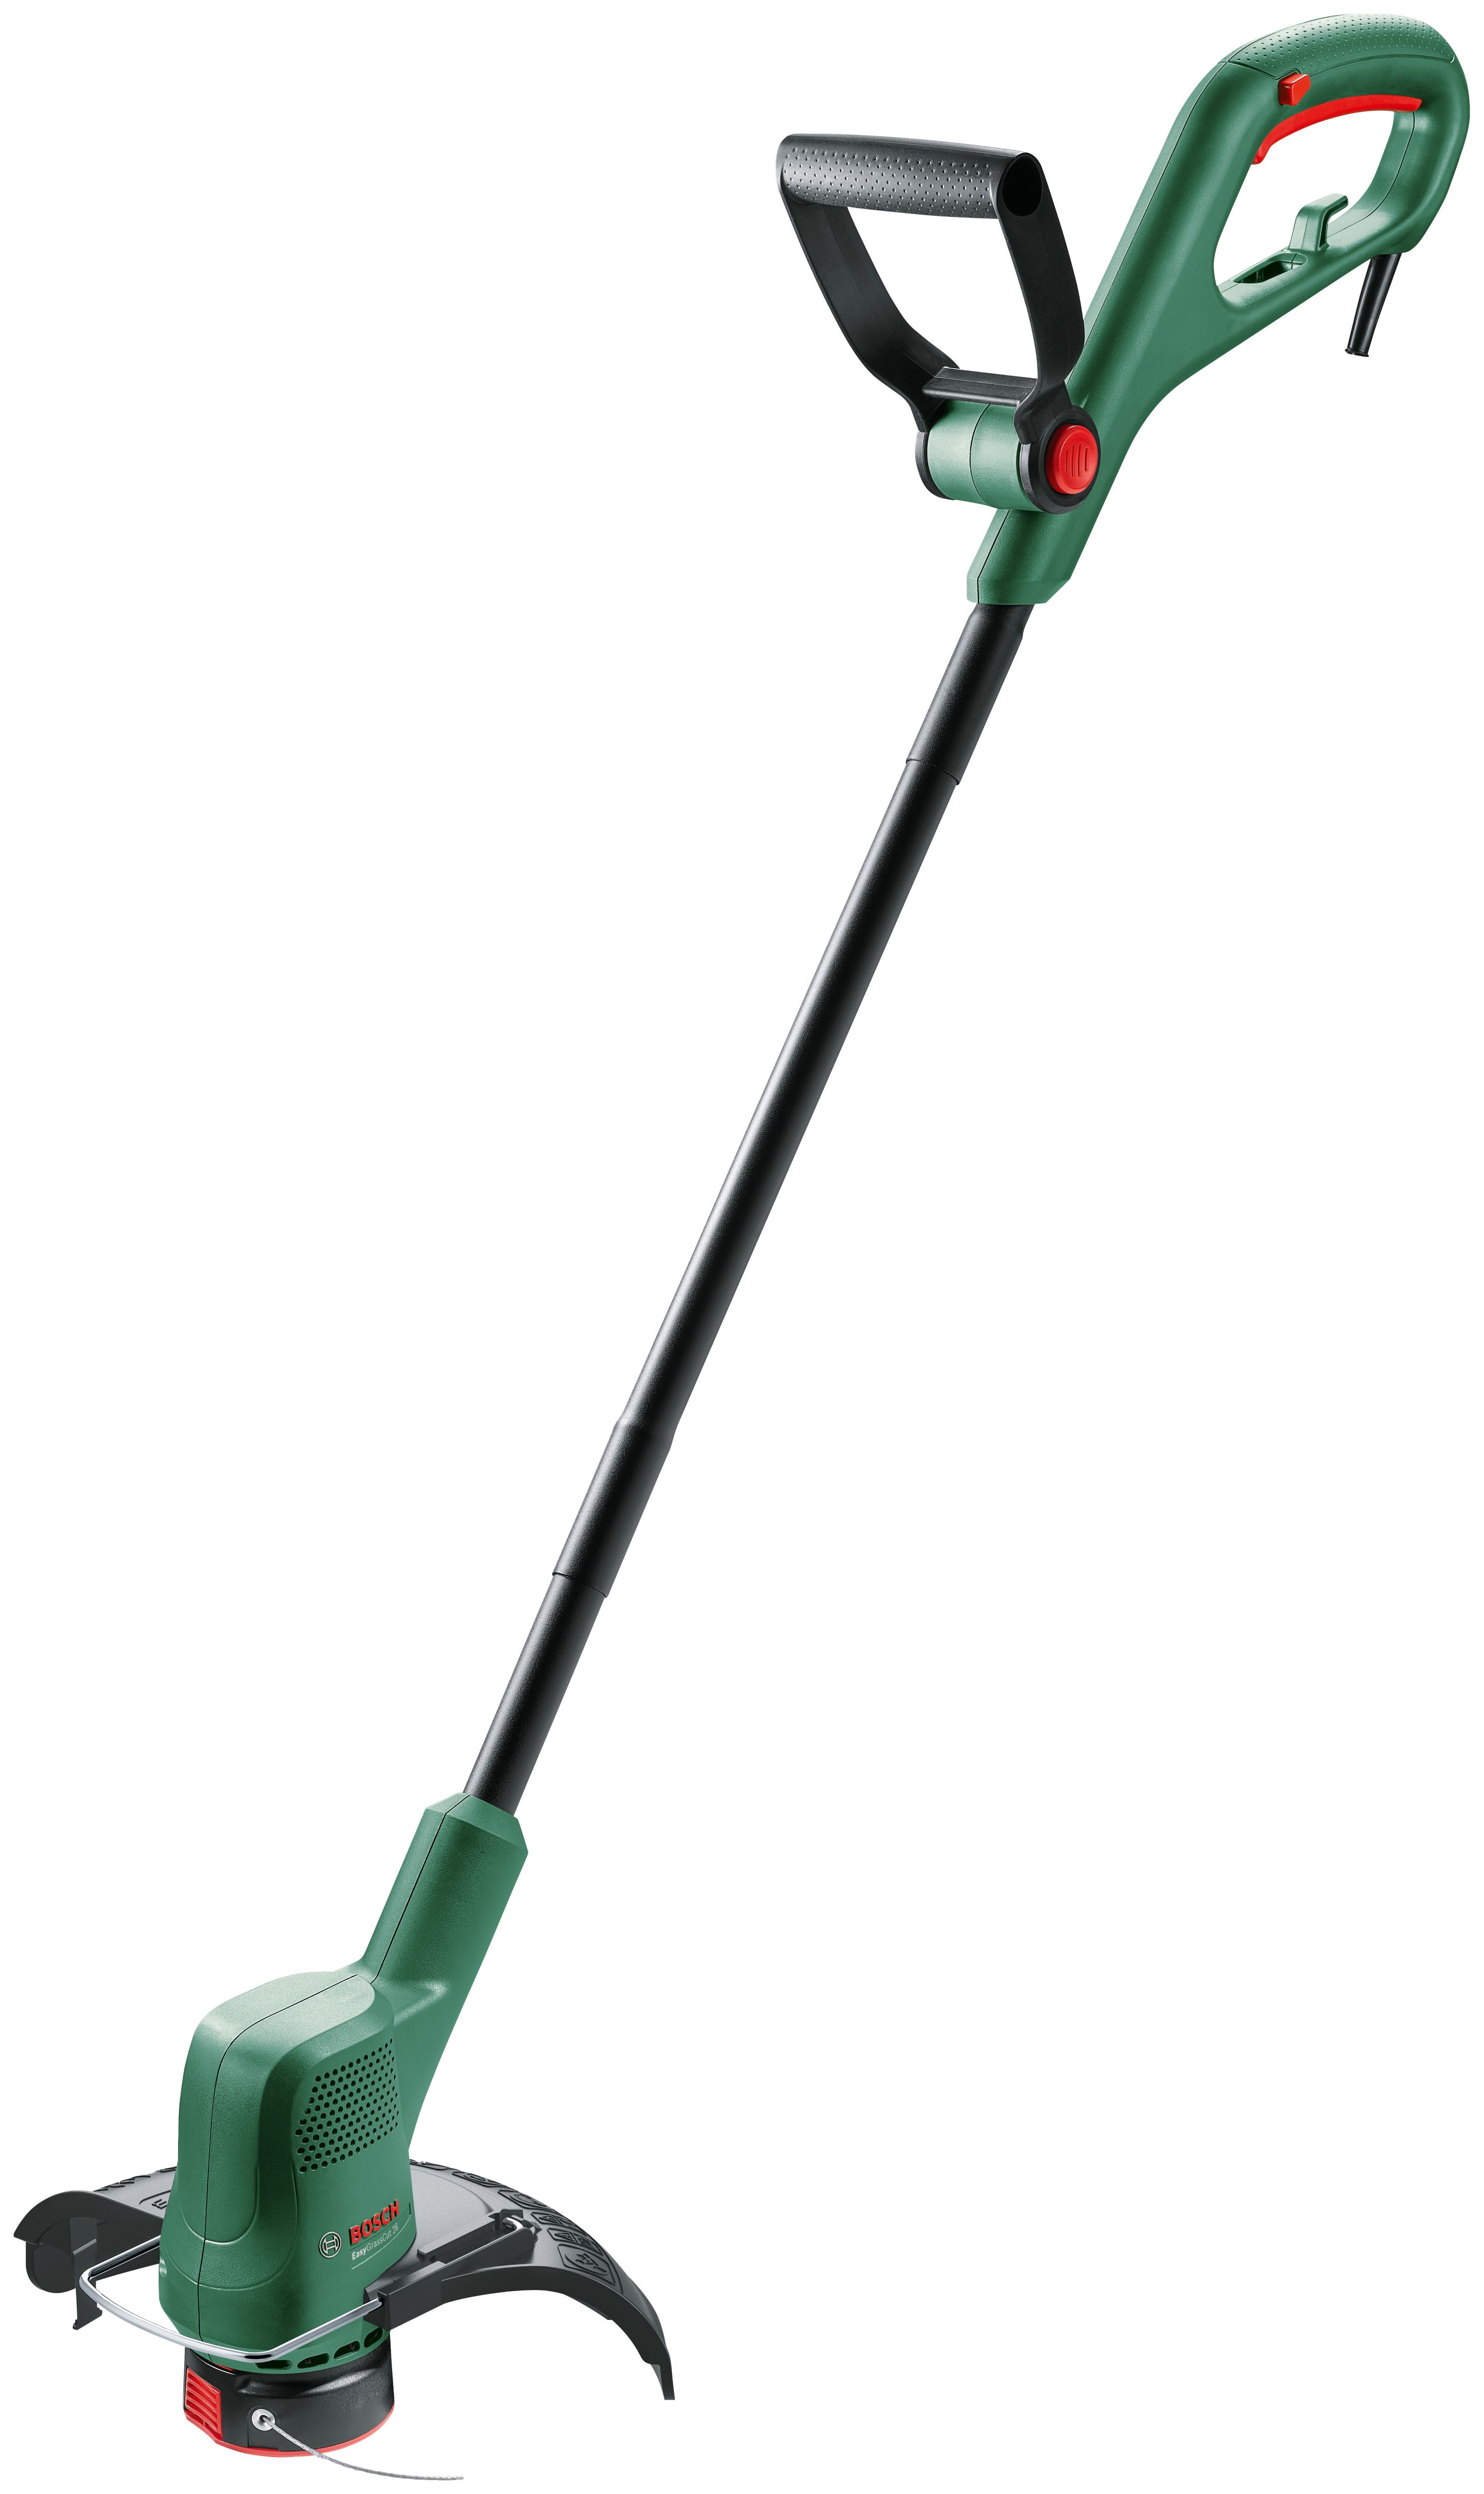 Image of Bosch EasyGrassCut 26 Corded Grass Trimmer - 280W